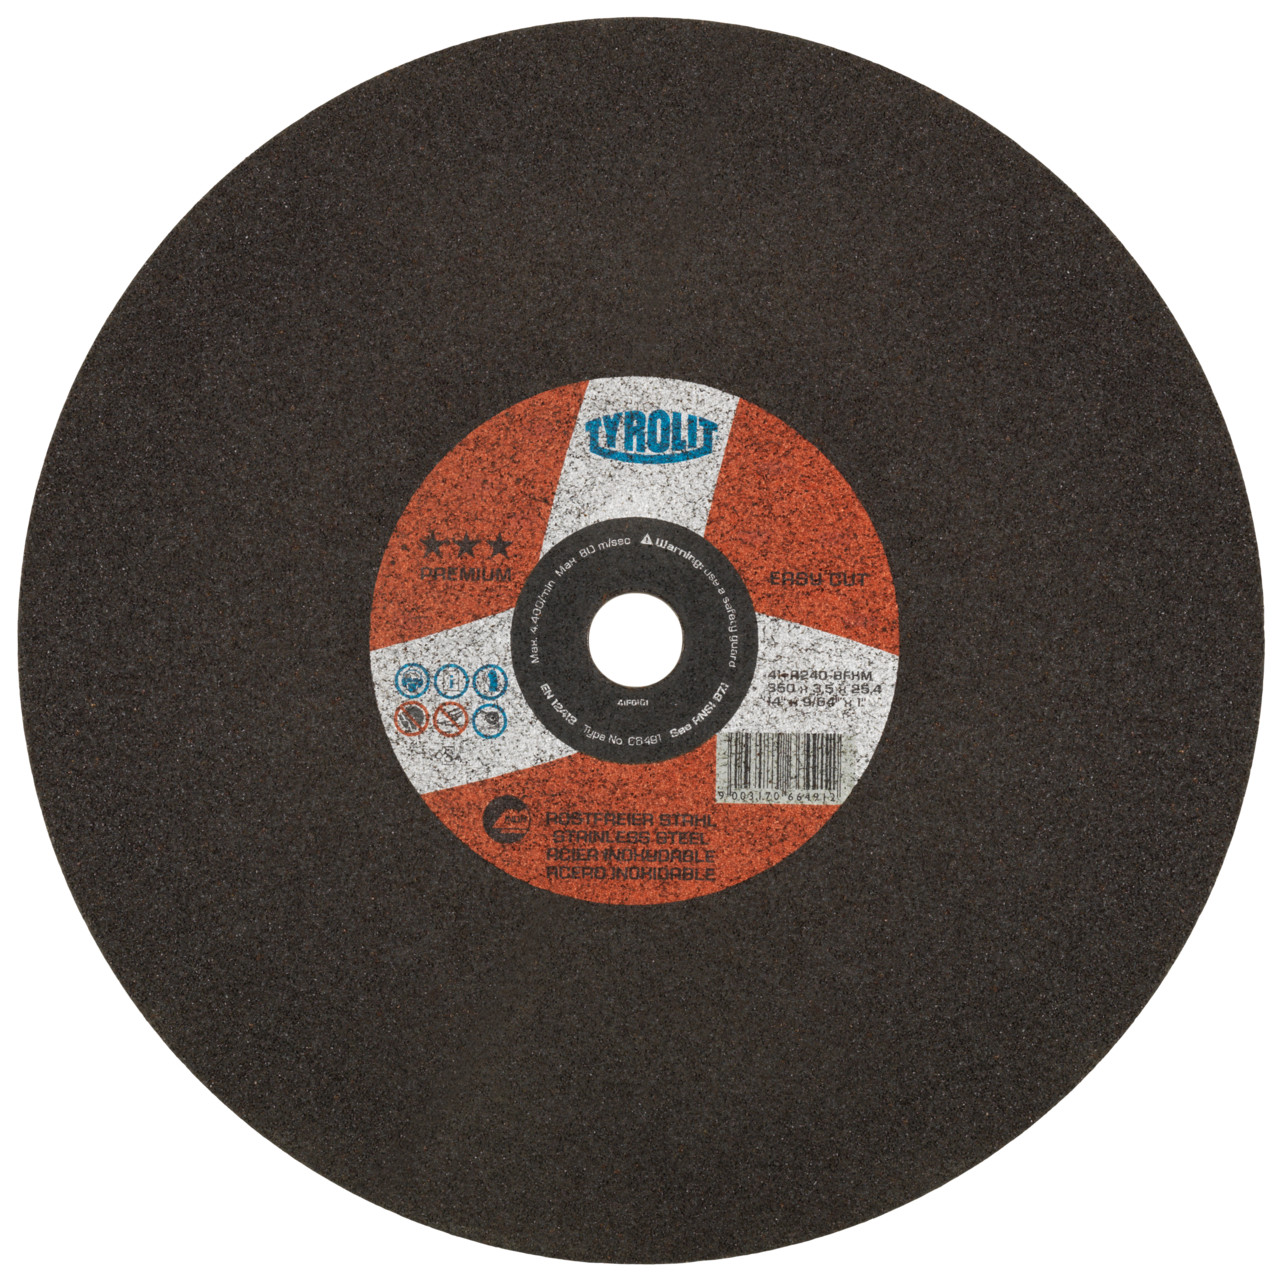 Tyrolit Cutting discs DxUxH 600x7x60 For stainless steel, shape: 42 - offset version, Art. 647377